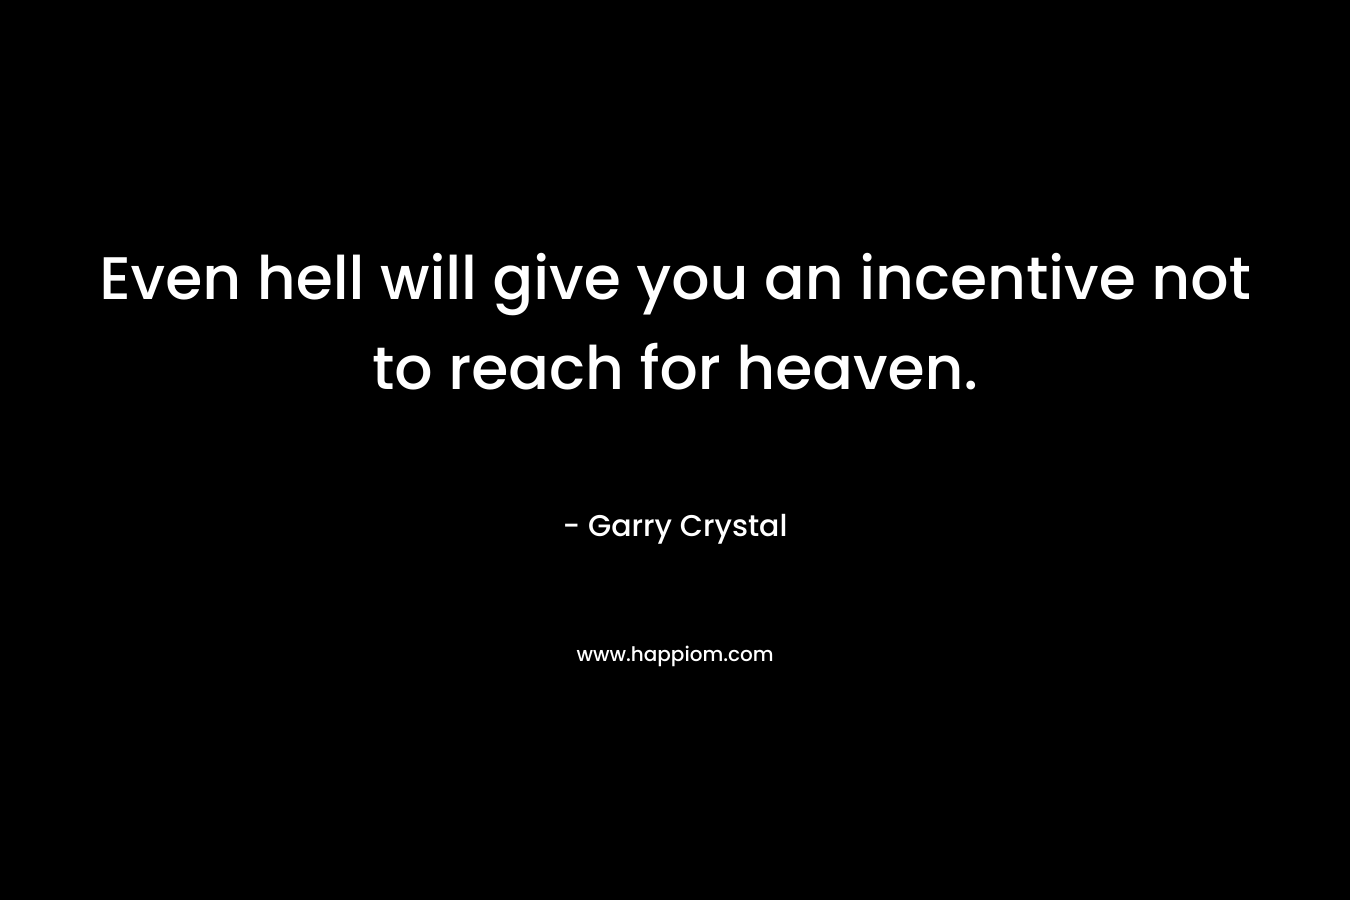 Even hell will give you an incentive not to reach for heaven.